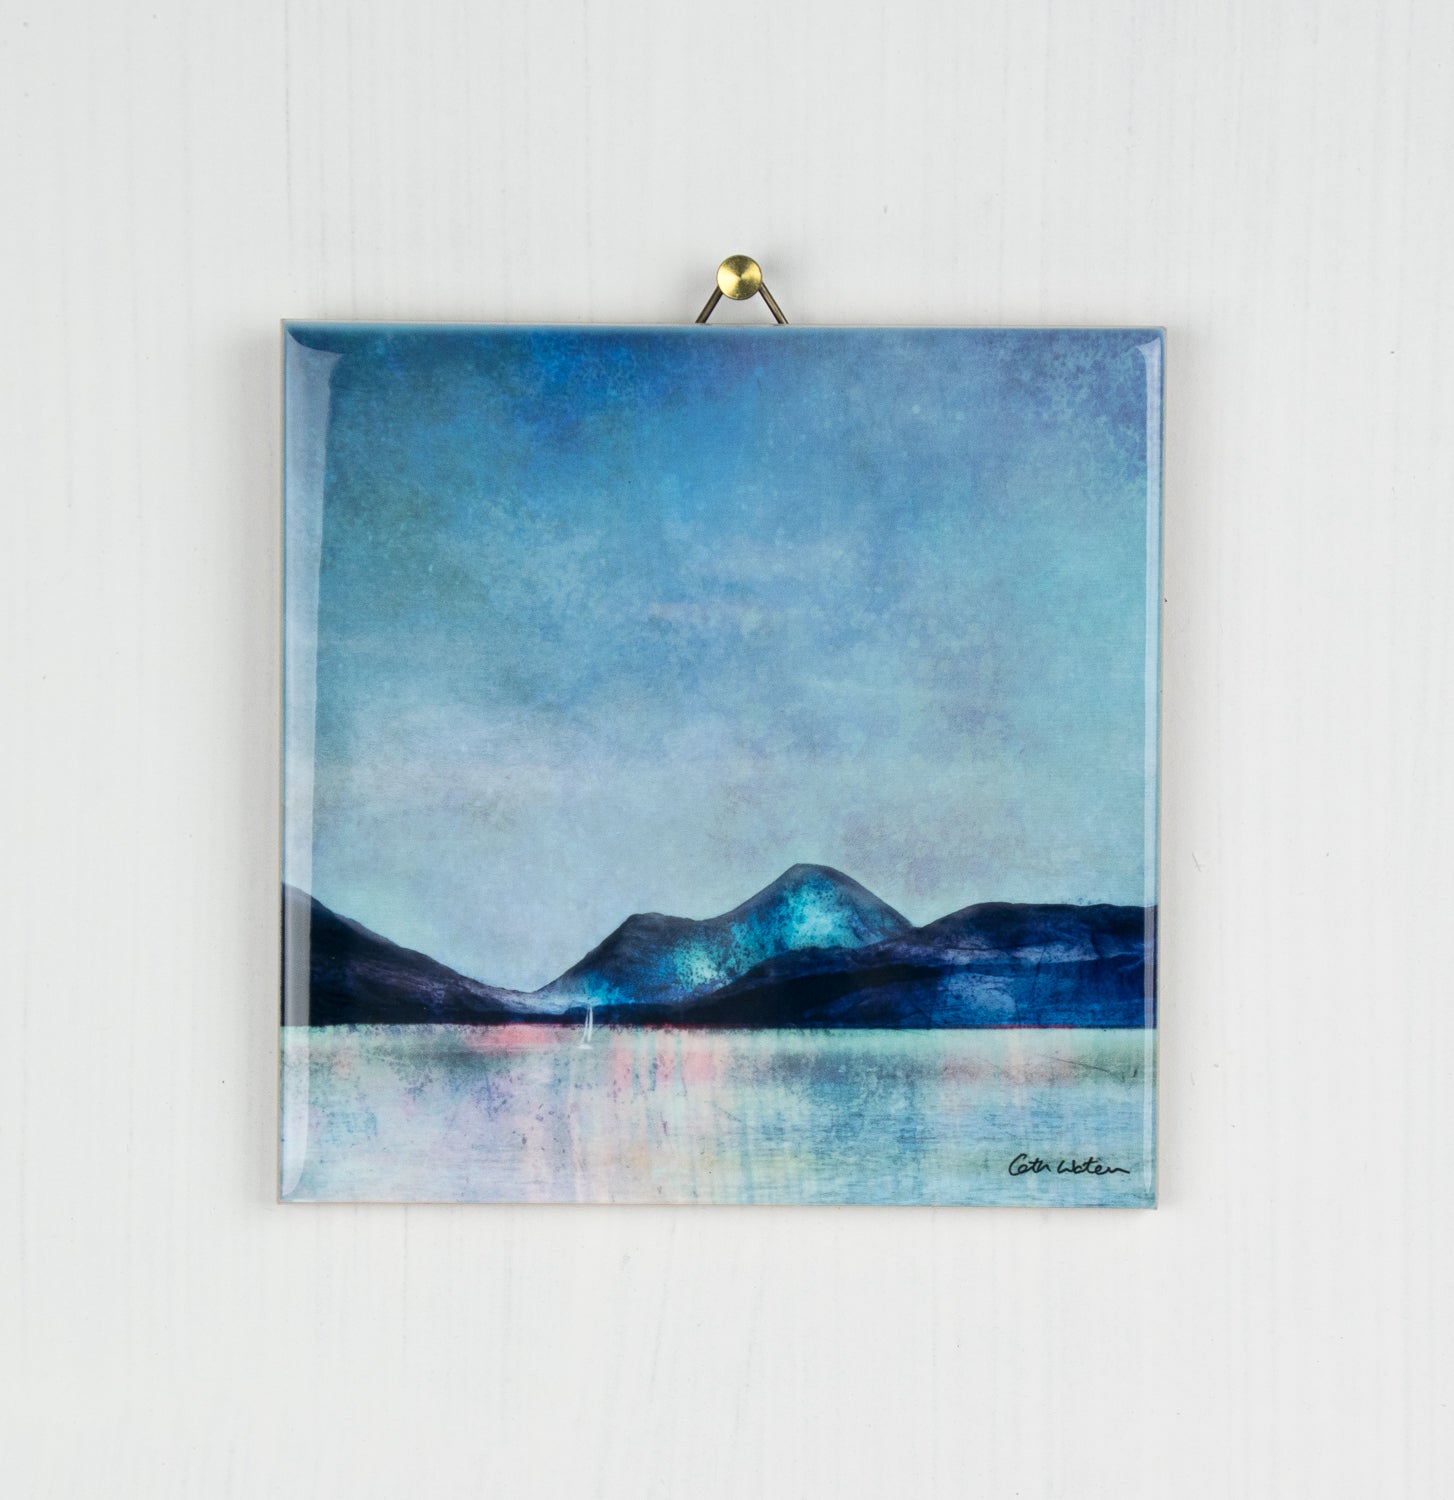 Sound of Mull Ceramic Tile | Cath Waters | Scottish Creations